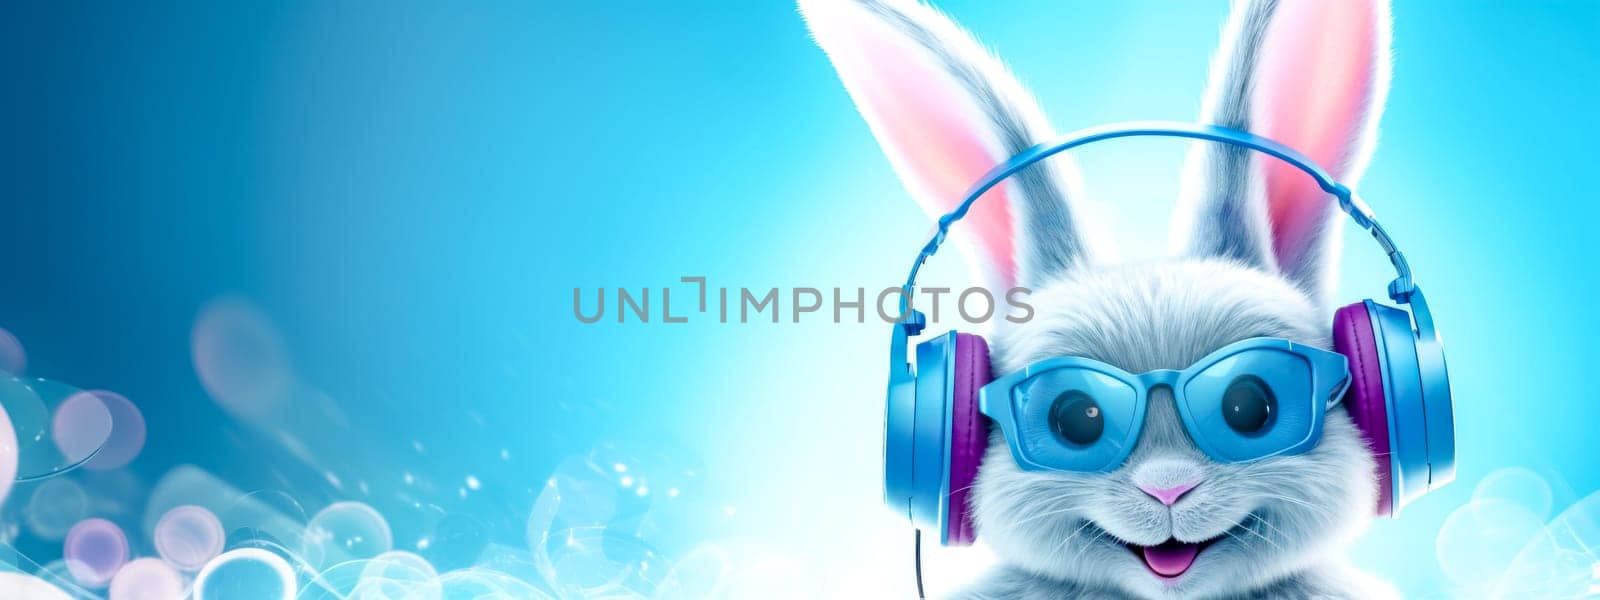 Cool dj bunny with headphones banner by Edophoto